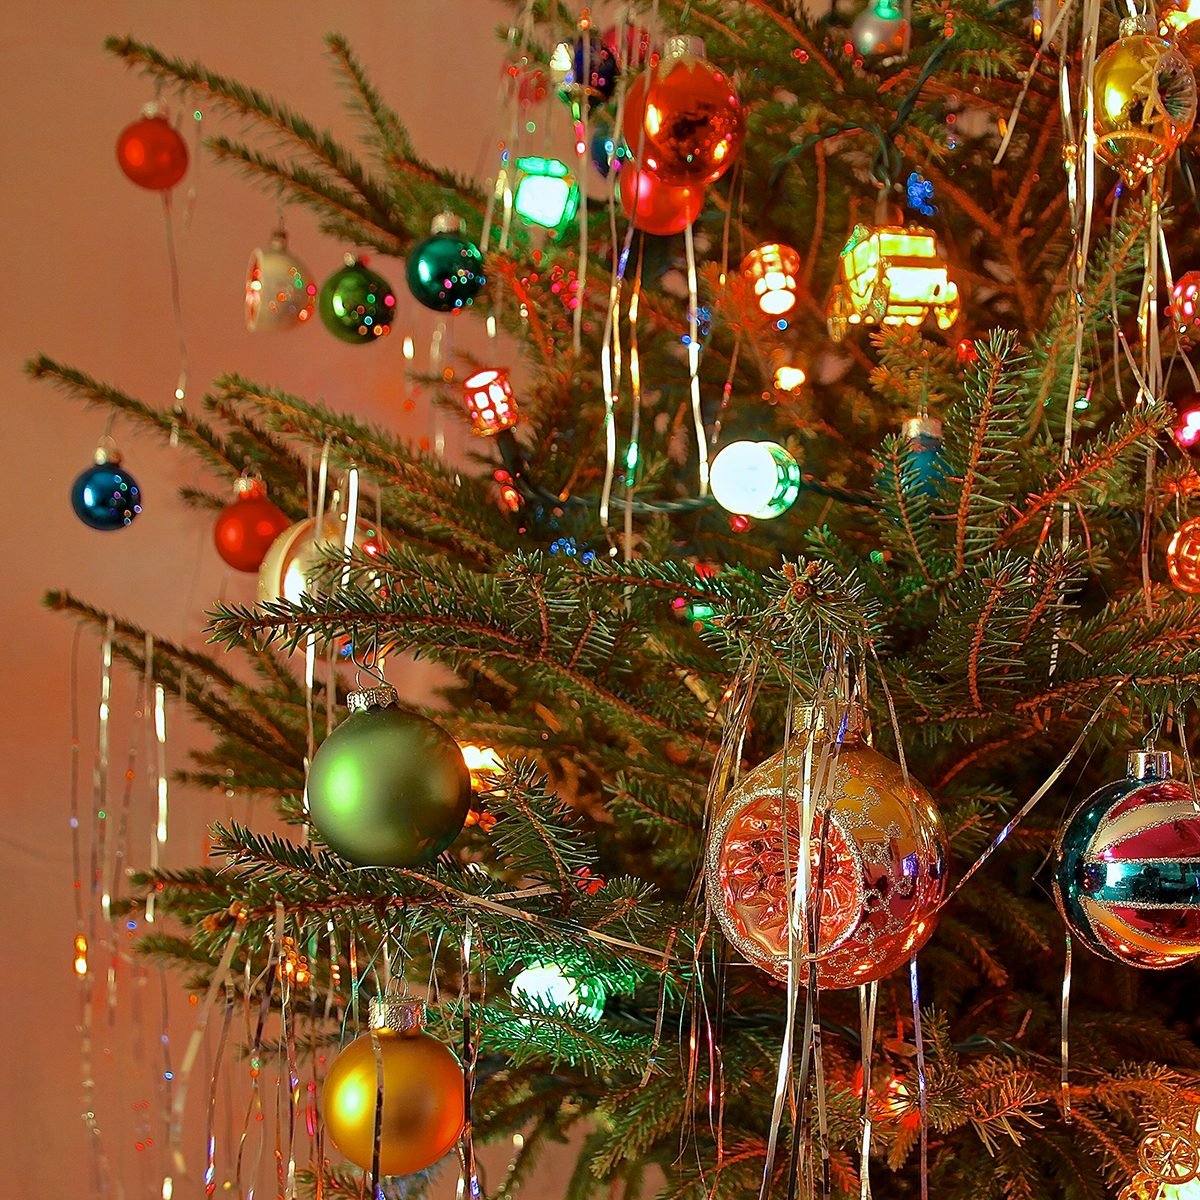 16 Vintage Christmas Decorations We Love for the Holidays